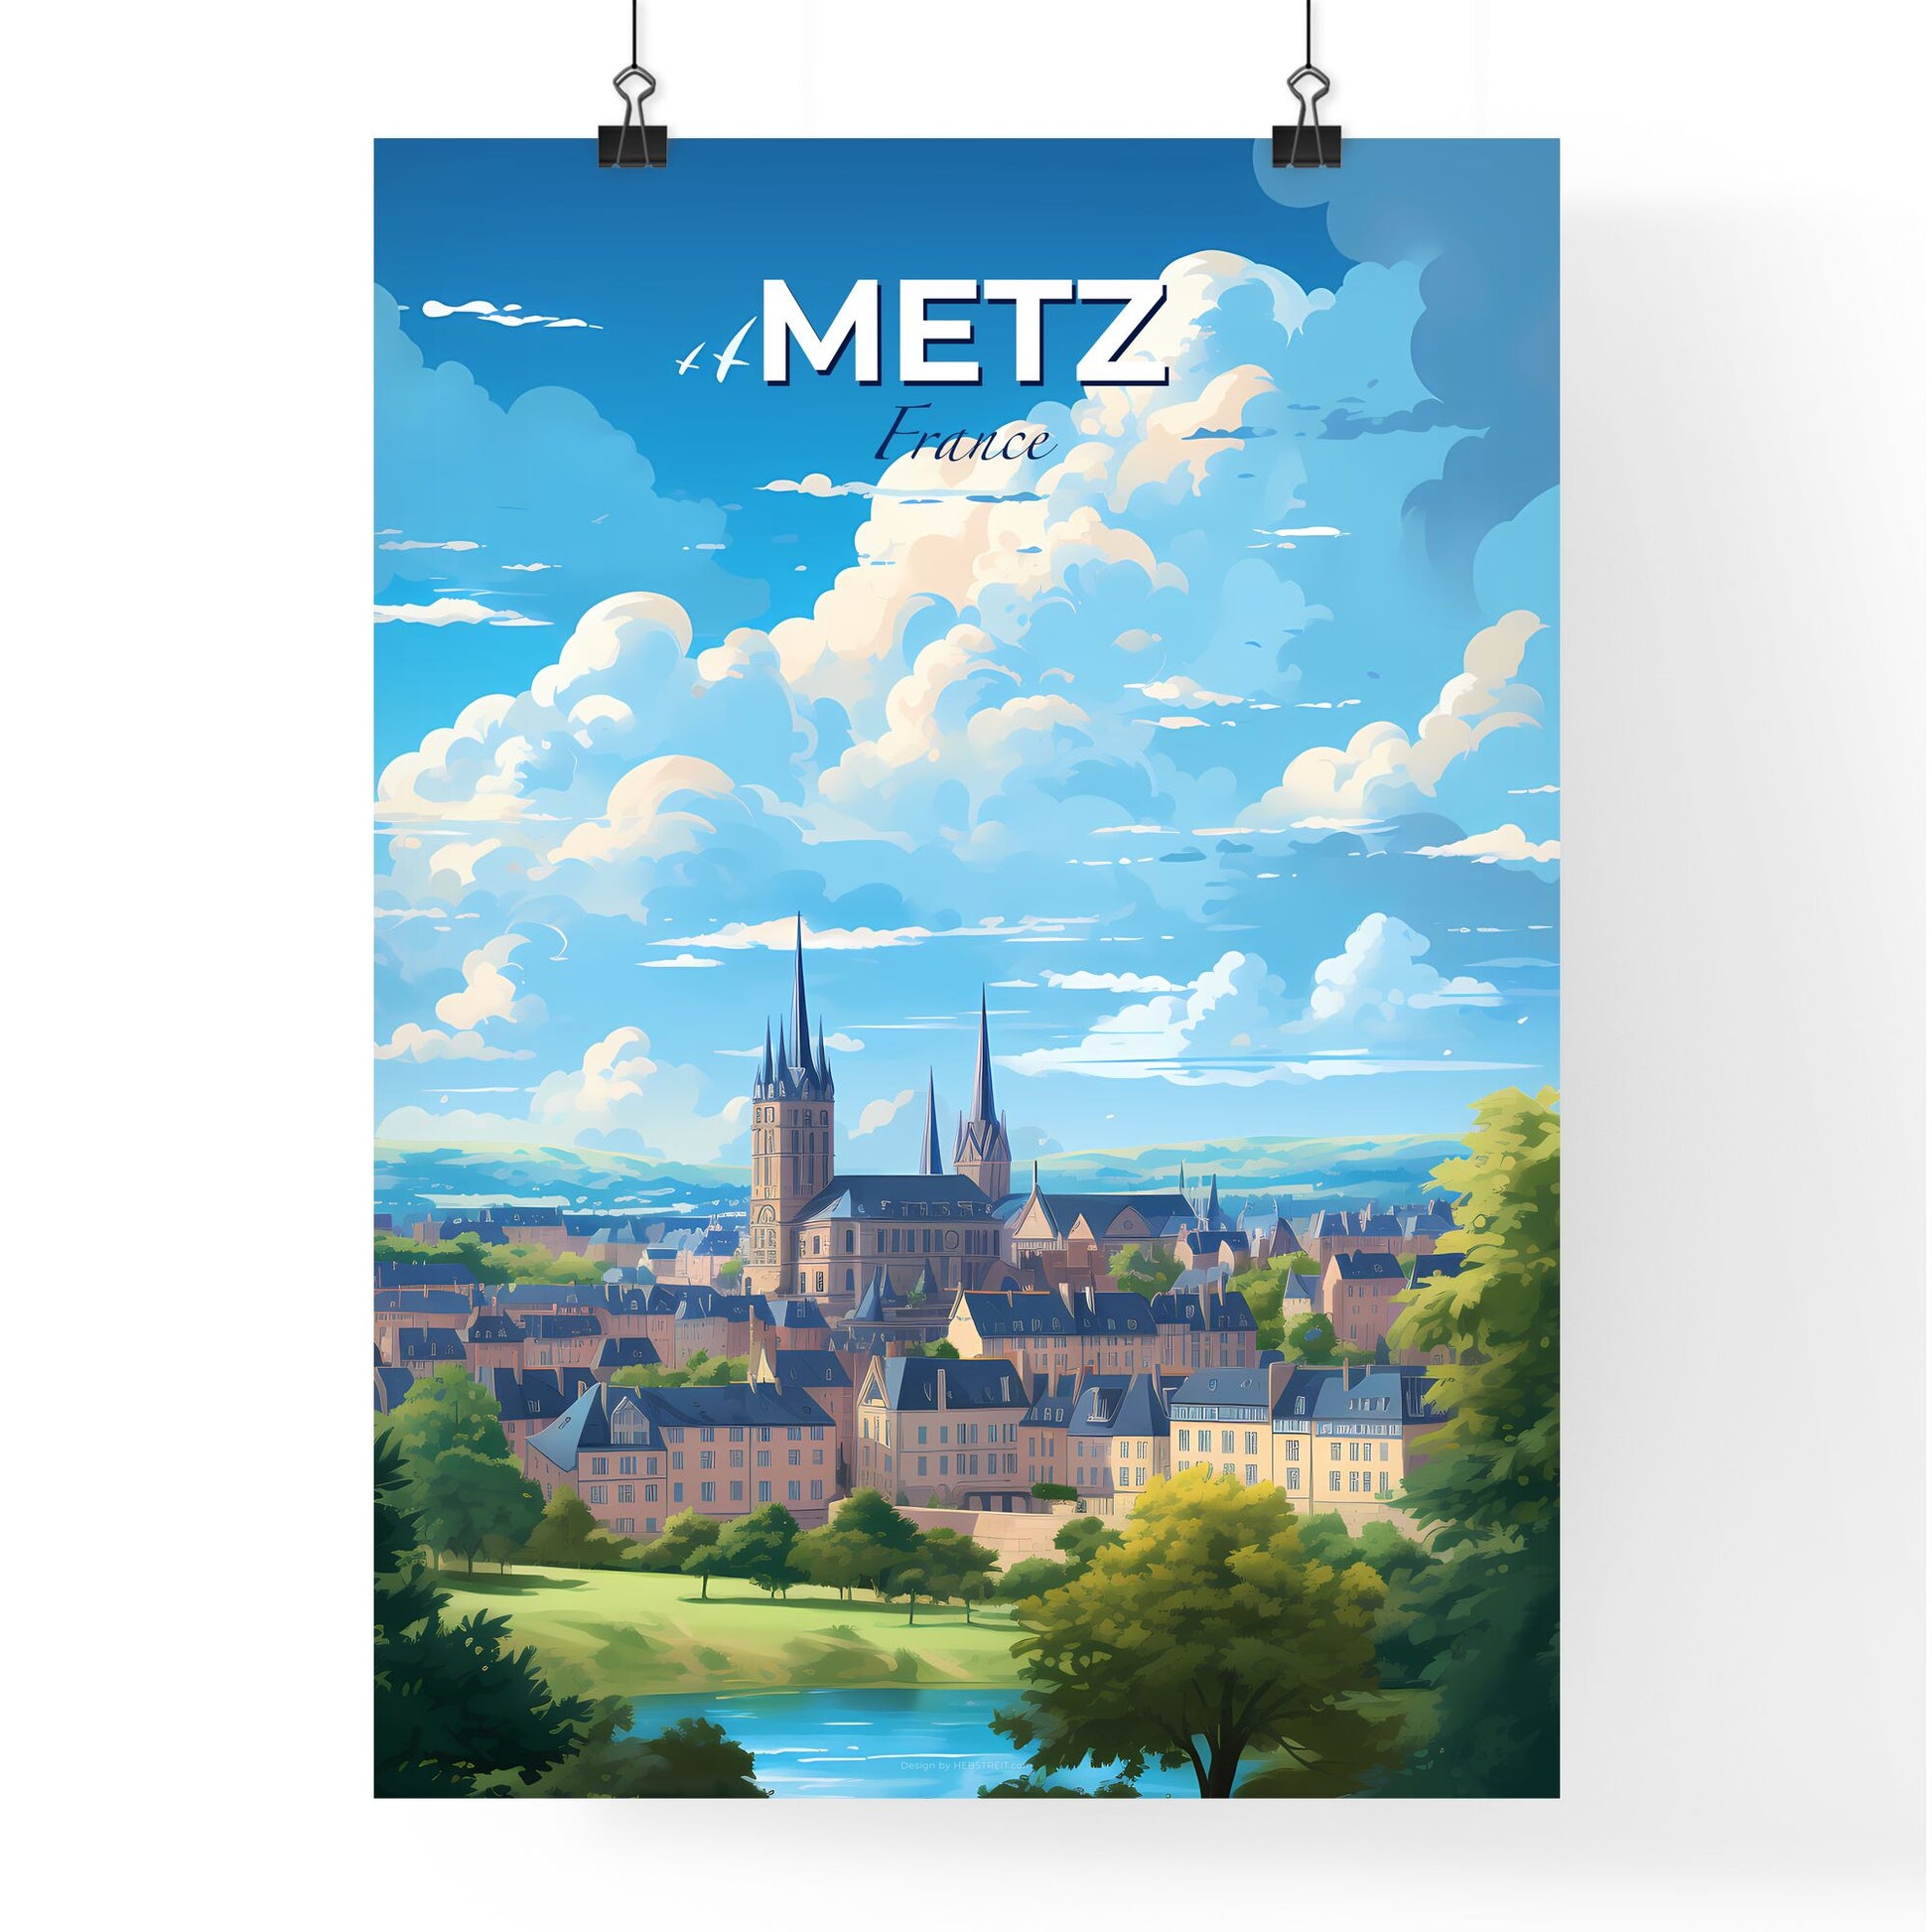 Metz France Skyline - A City With Towers And Trees - Customizable Travel Gift Default Title